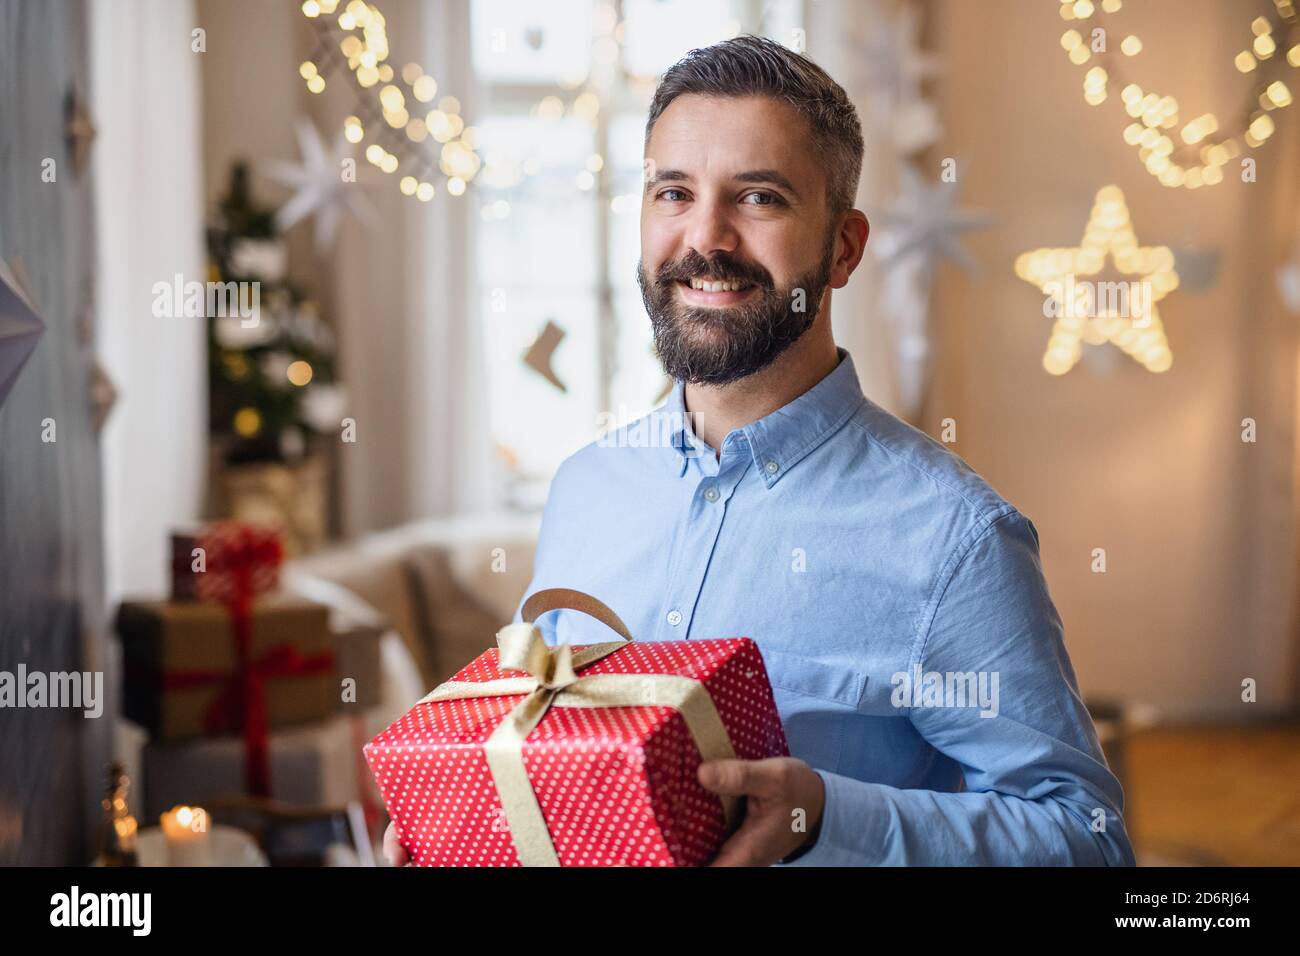 Mature man indoors at home at Christmas, holding present. Stock Photo